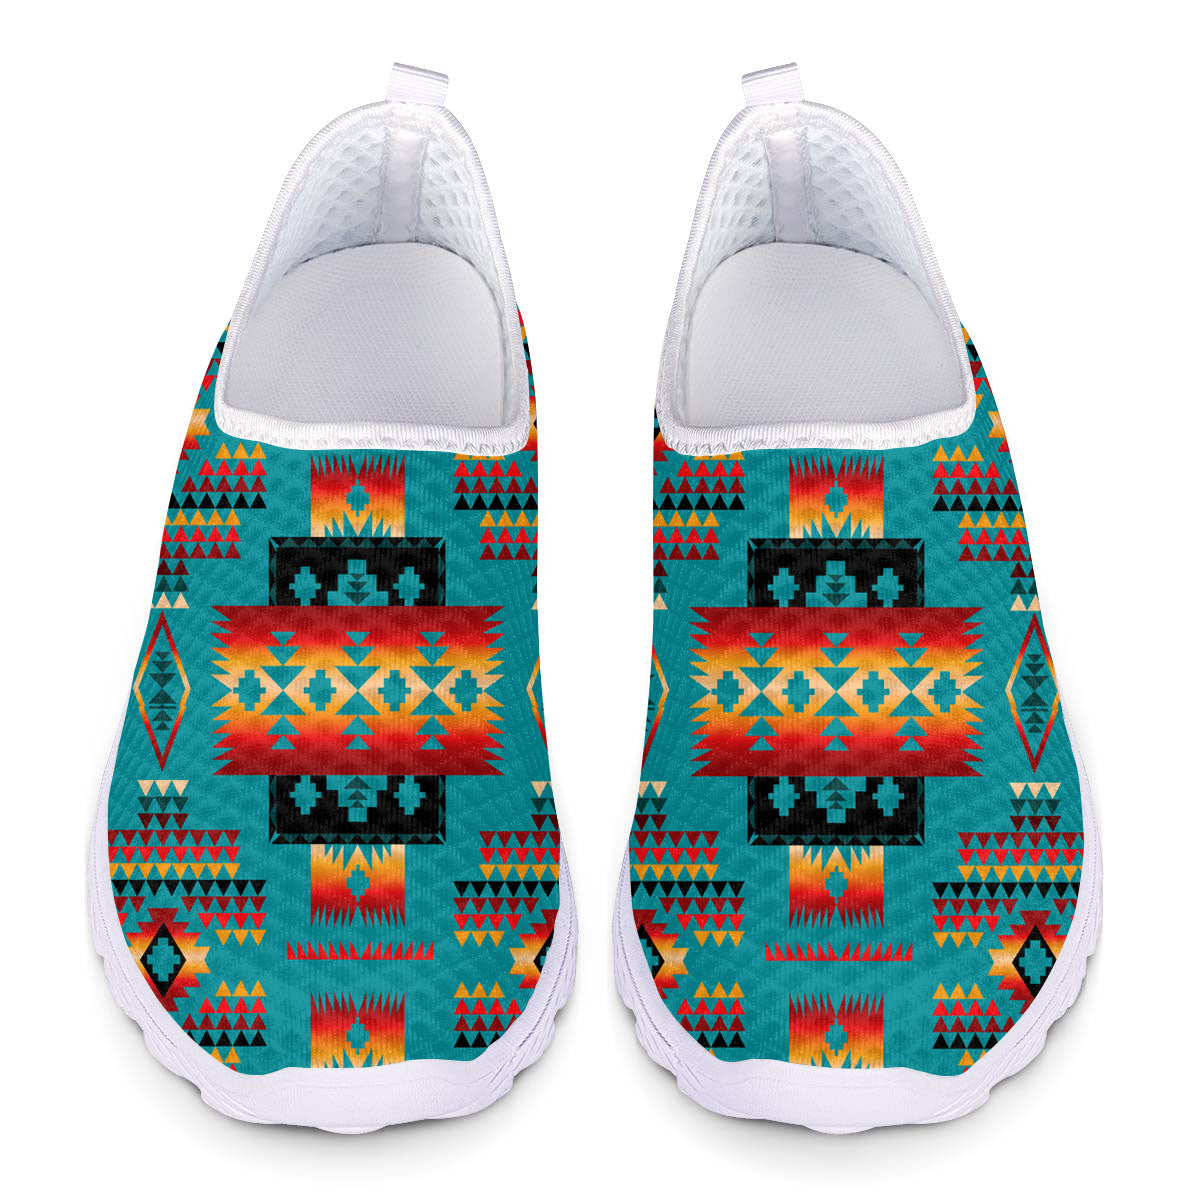 GB-NAT00046-01 Blue Native Tribes Pattern Native American Mesh Shoes - Powwow Store